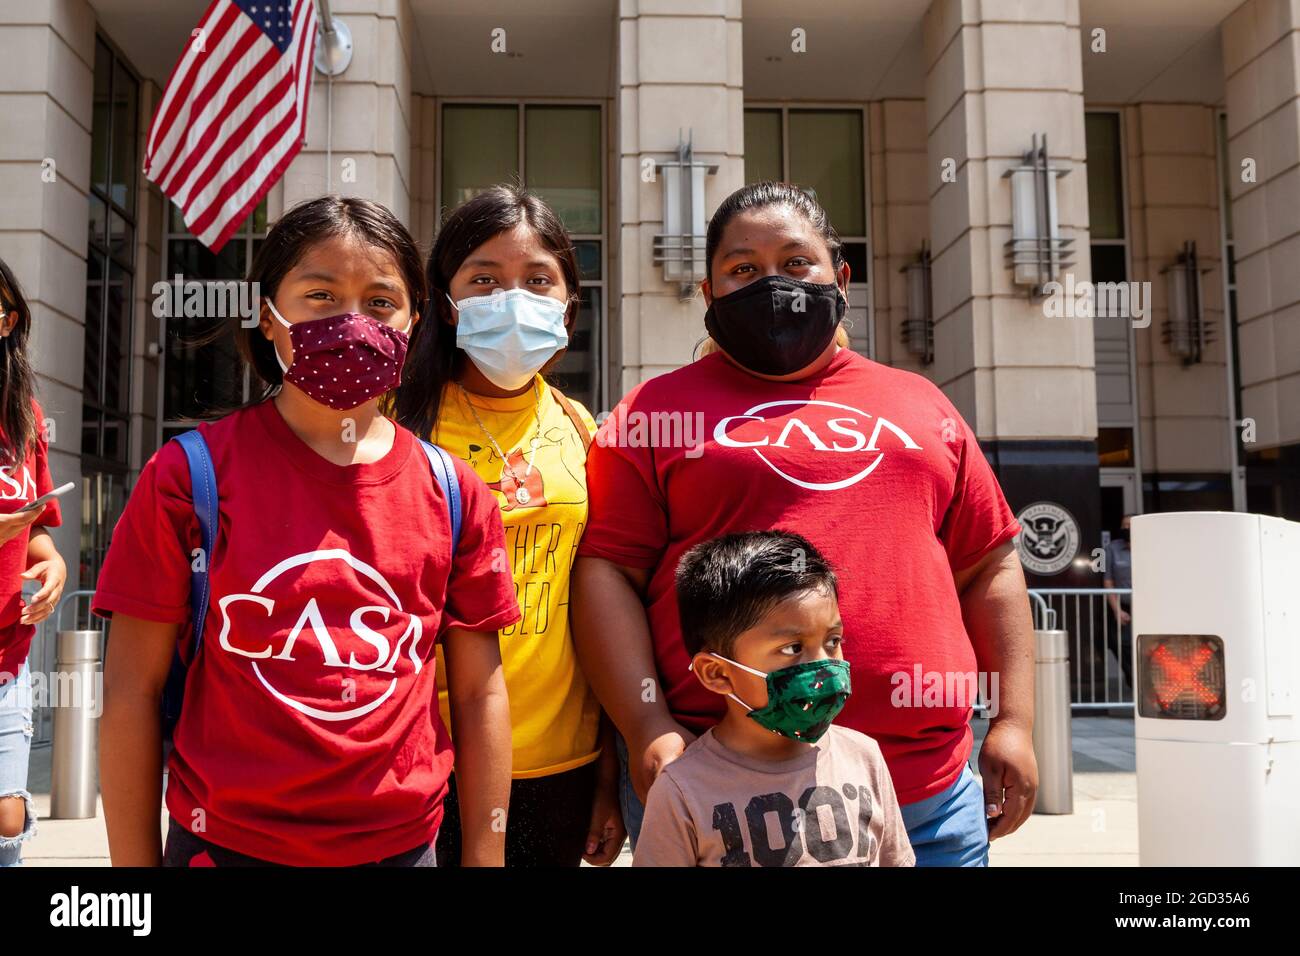 Washington, DC, USA, 10 August, 2021.  Pictured: The family of a man who has been detained by Immigration and Customs Enforcement (ICE) attends a rally demanding that ICE treat immigrants as people, not simply 'priority' or 'non-priority' categories.  Credit: Allison Bailey / Alamy Live News Stock Photo